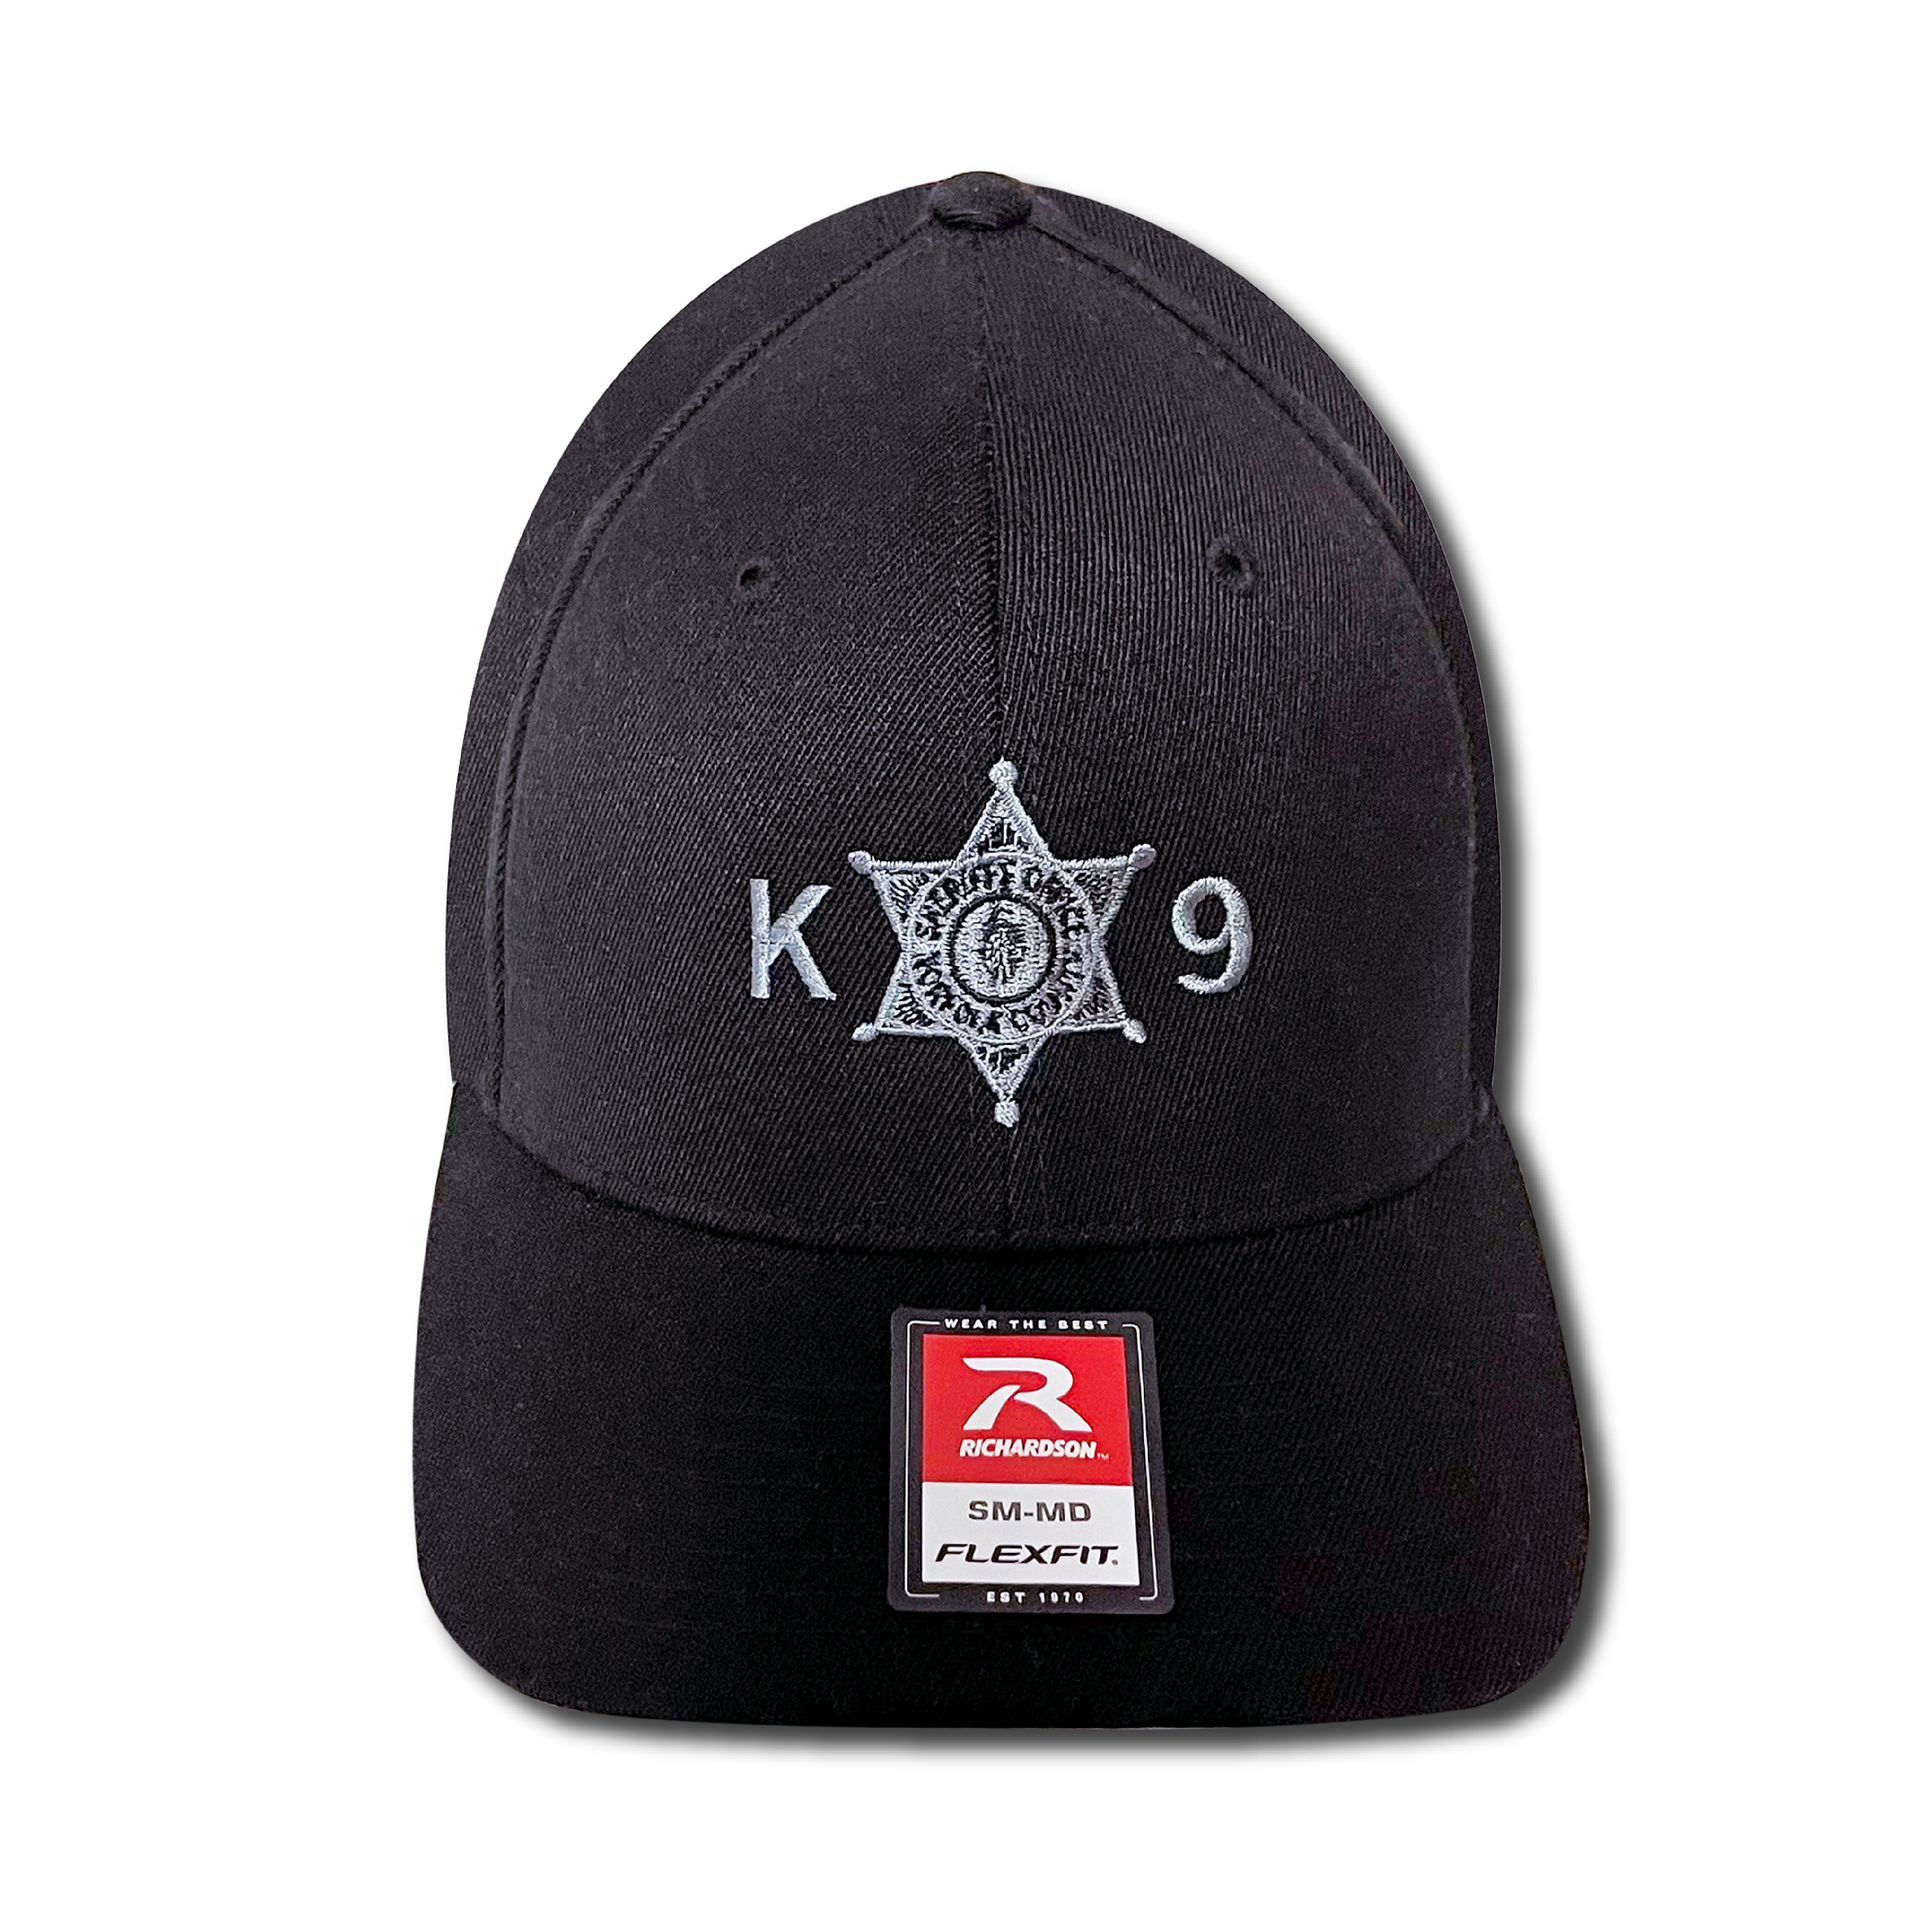 A black baseball cap with the number 9 on it